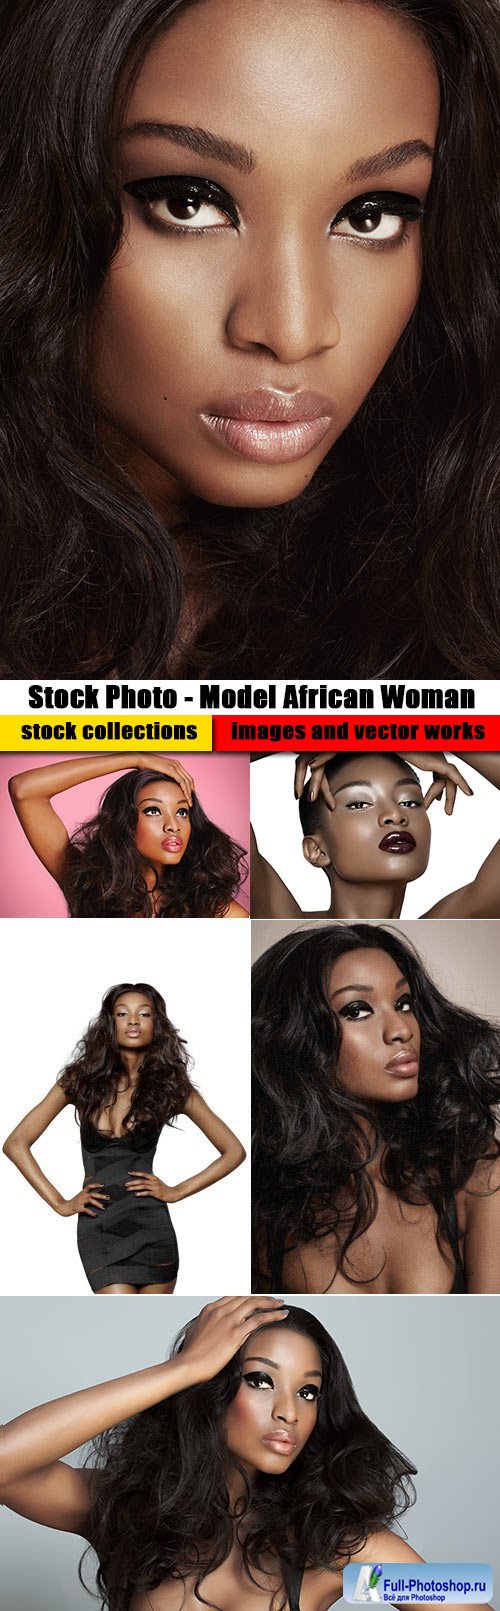 Stock Photo - Model African Woman